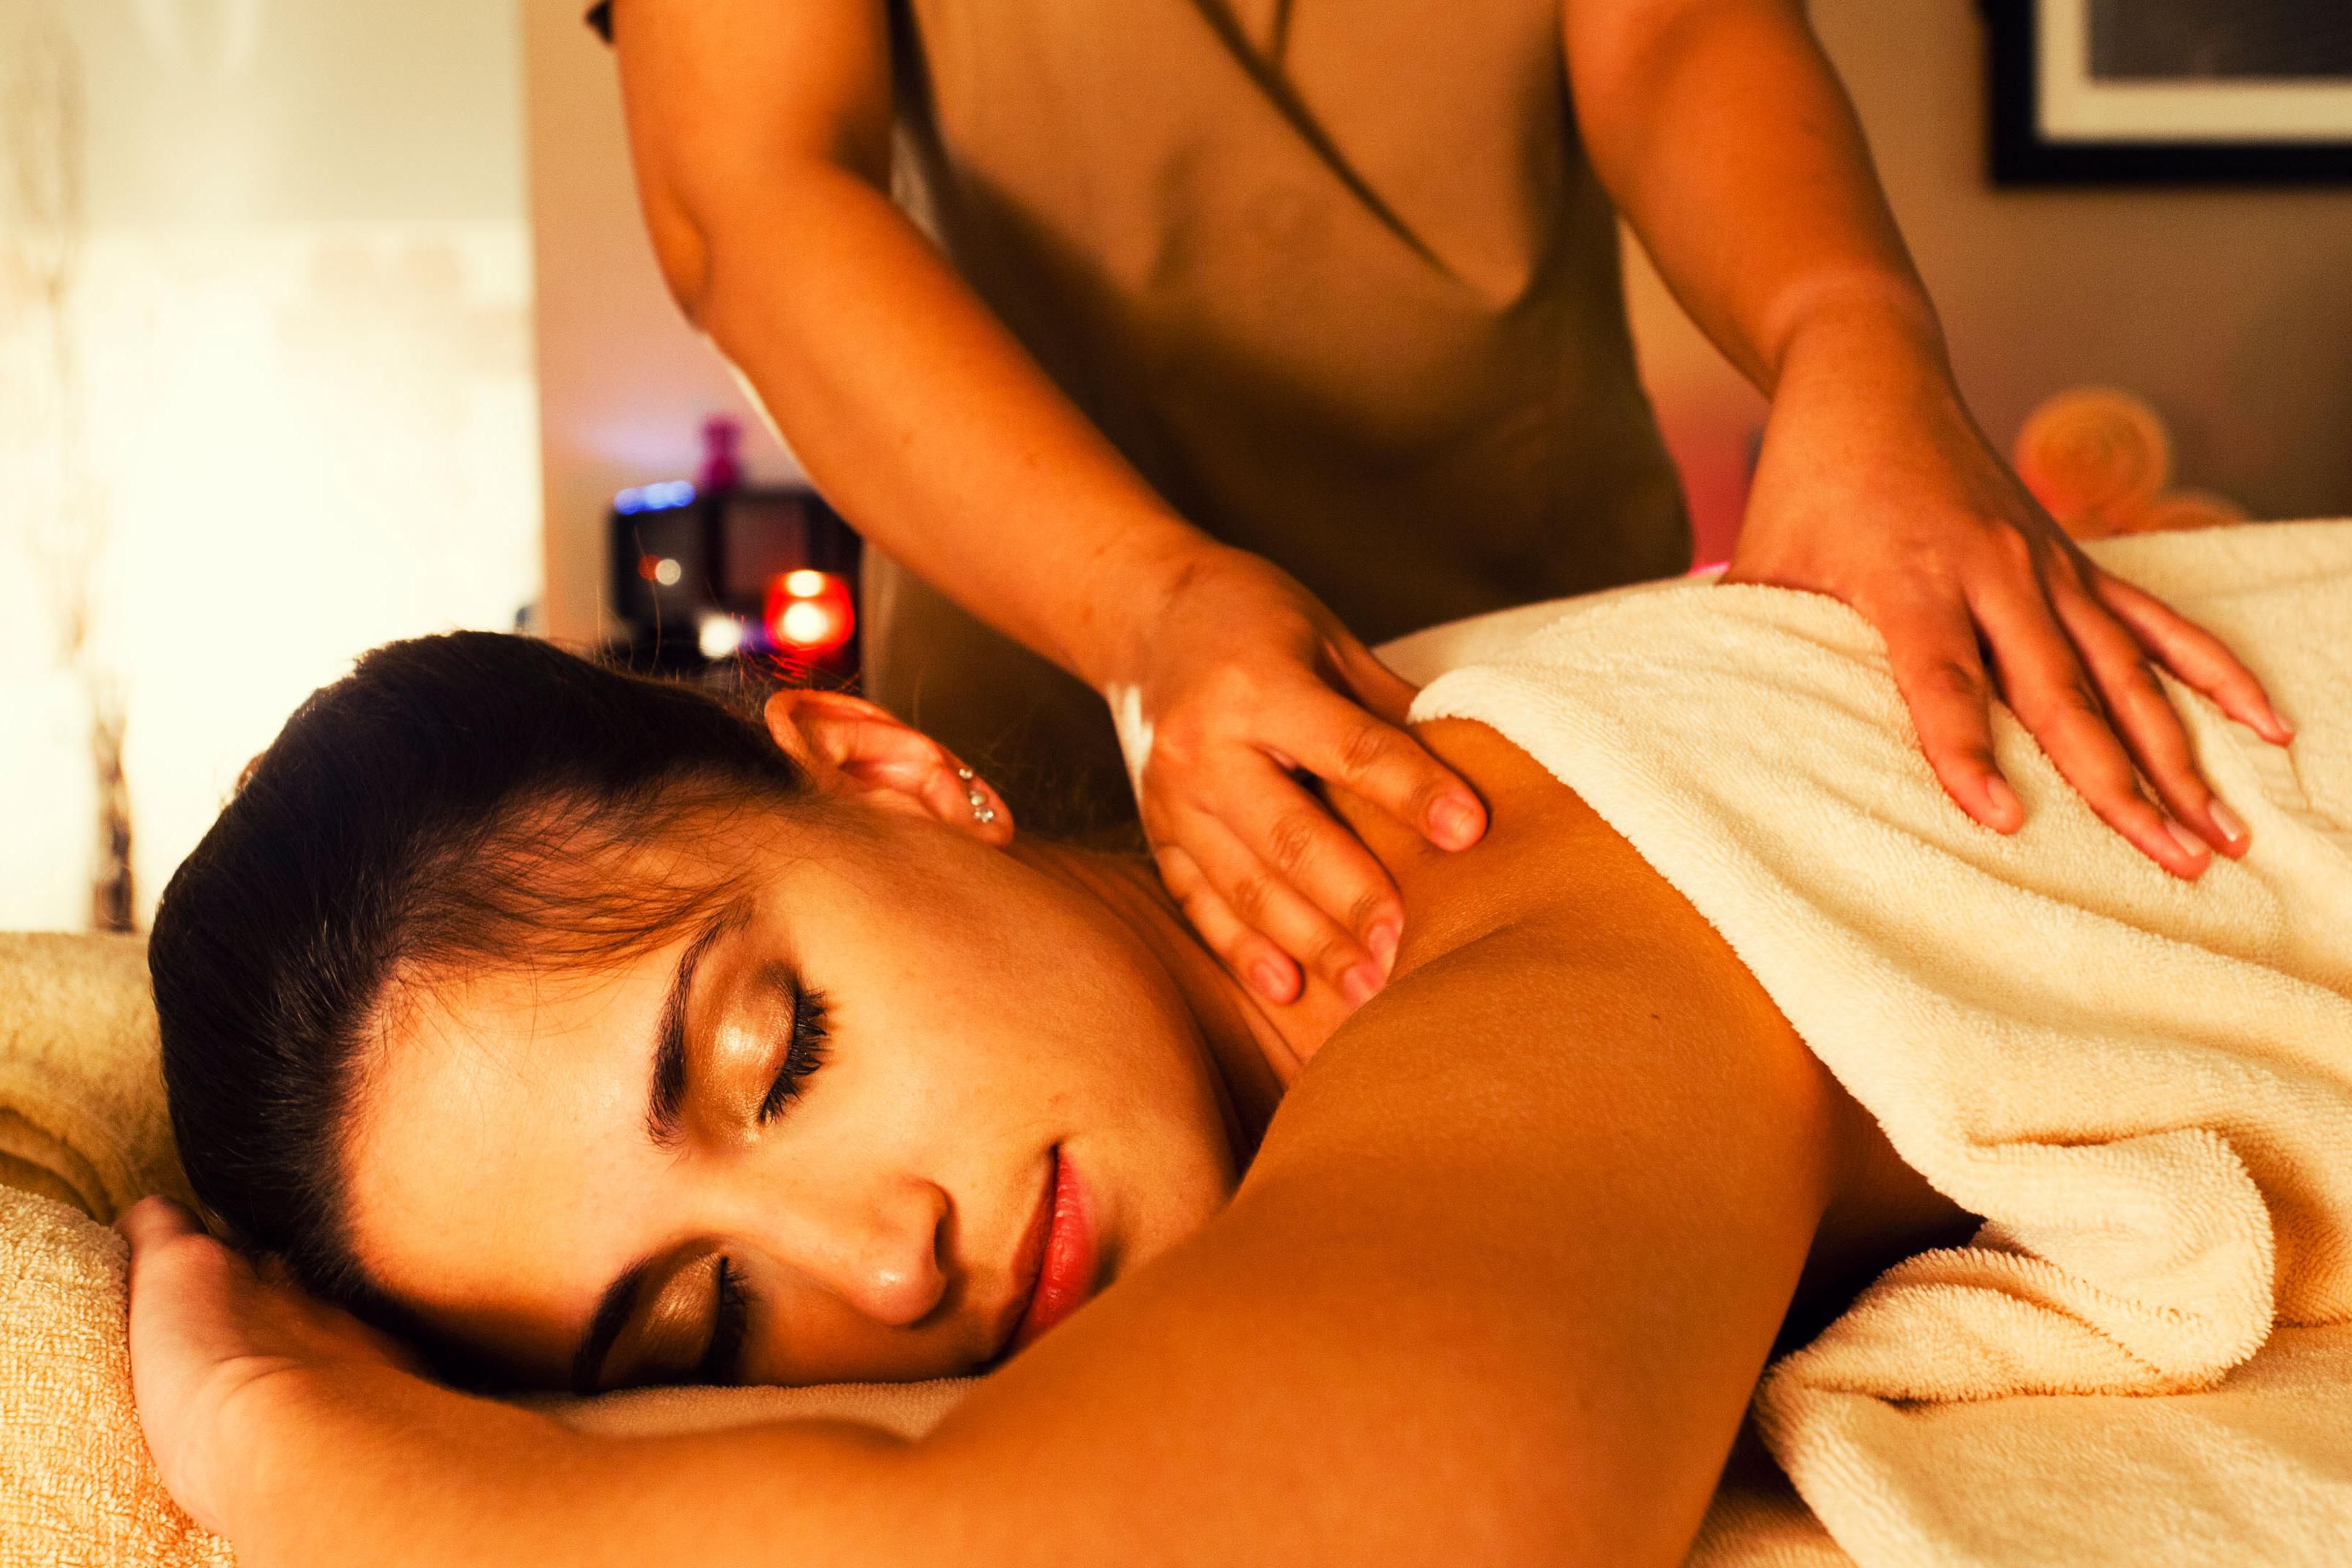 Take a journey of relaxation and rejuvenation at Sense Massage Center with your choice of aromatherapy oils or candle massage. Let the therapist recommend what your body really needs to be revived and restored.